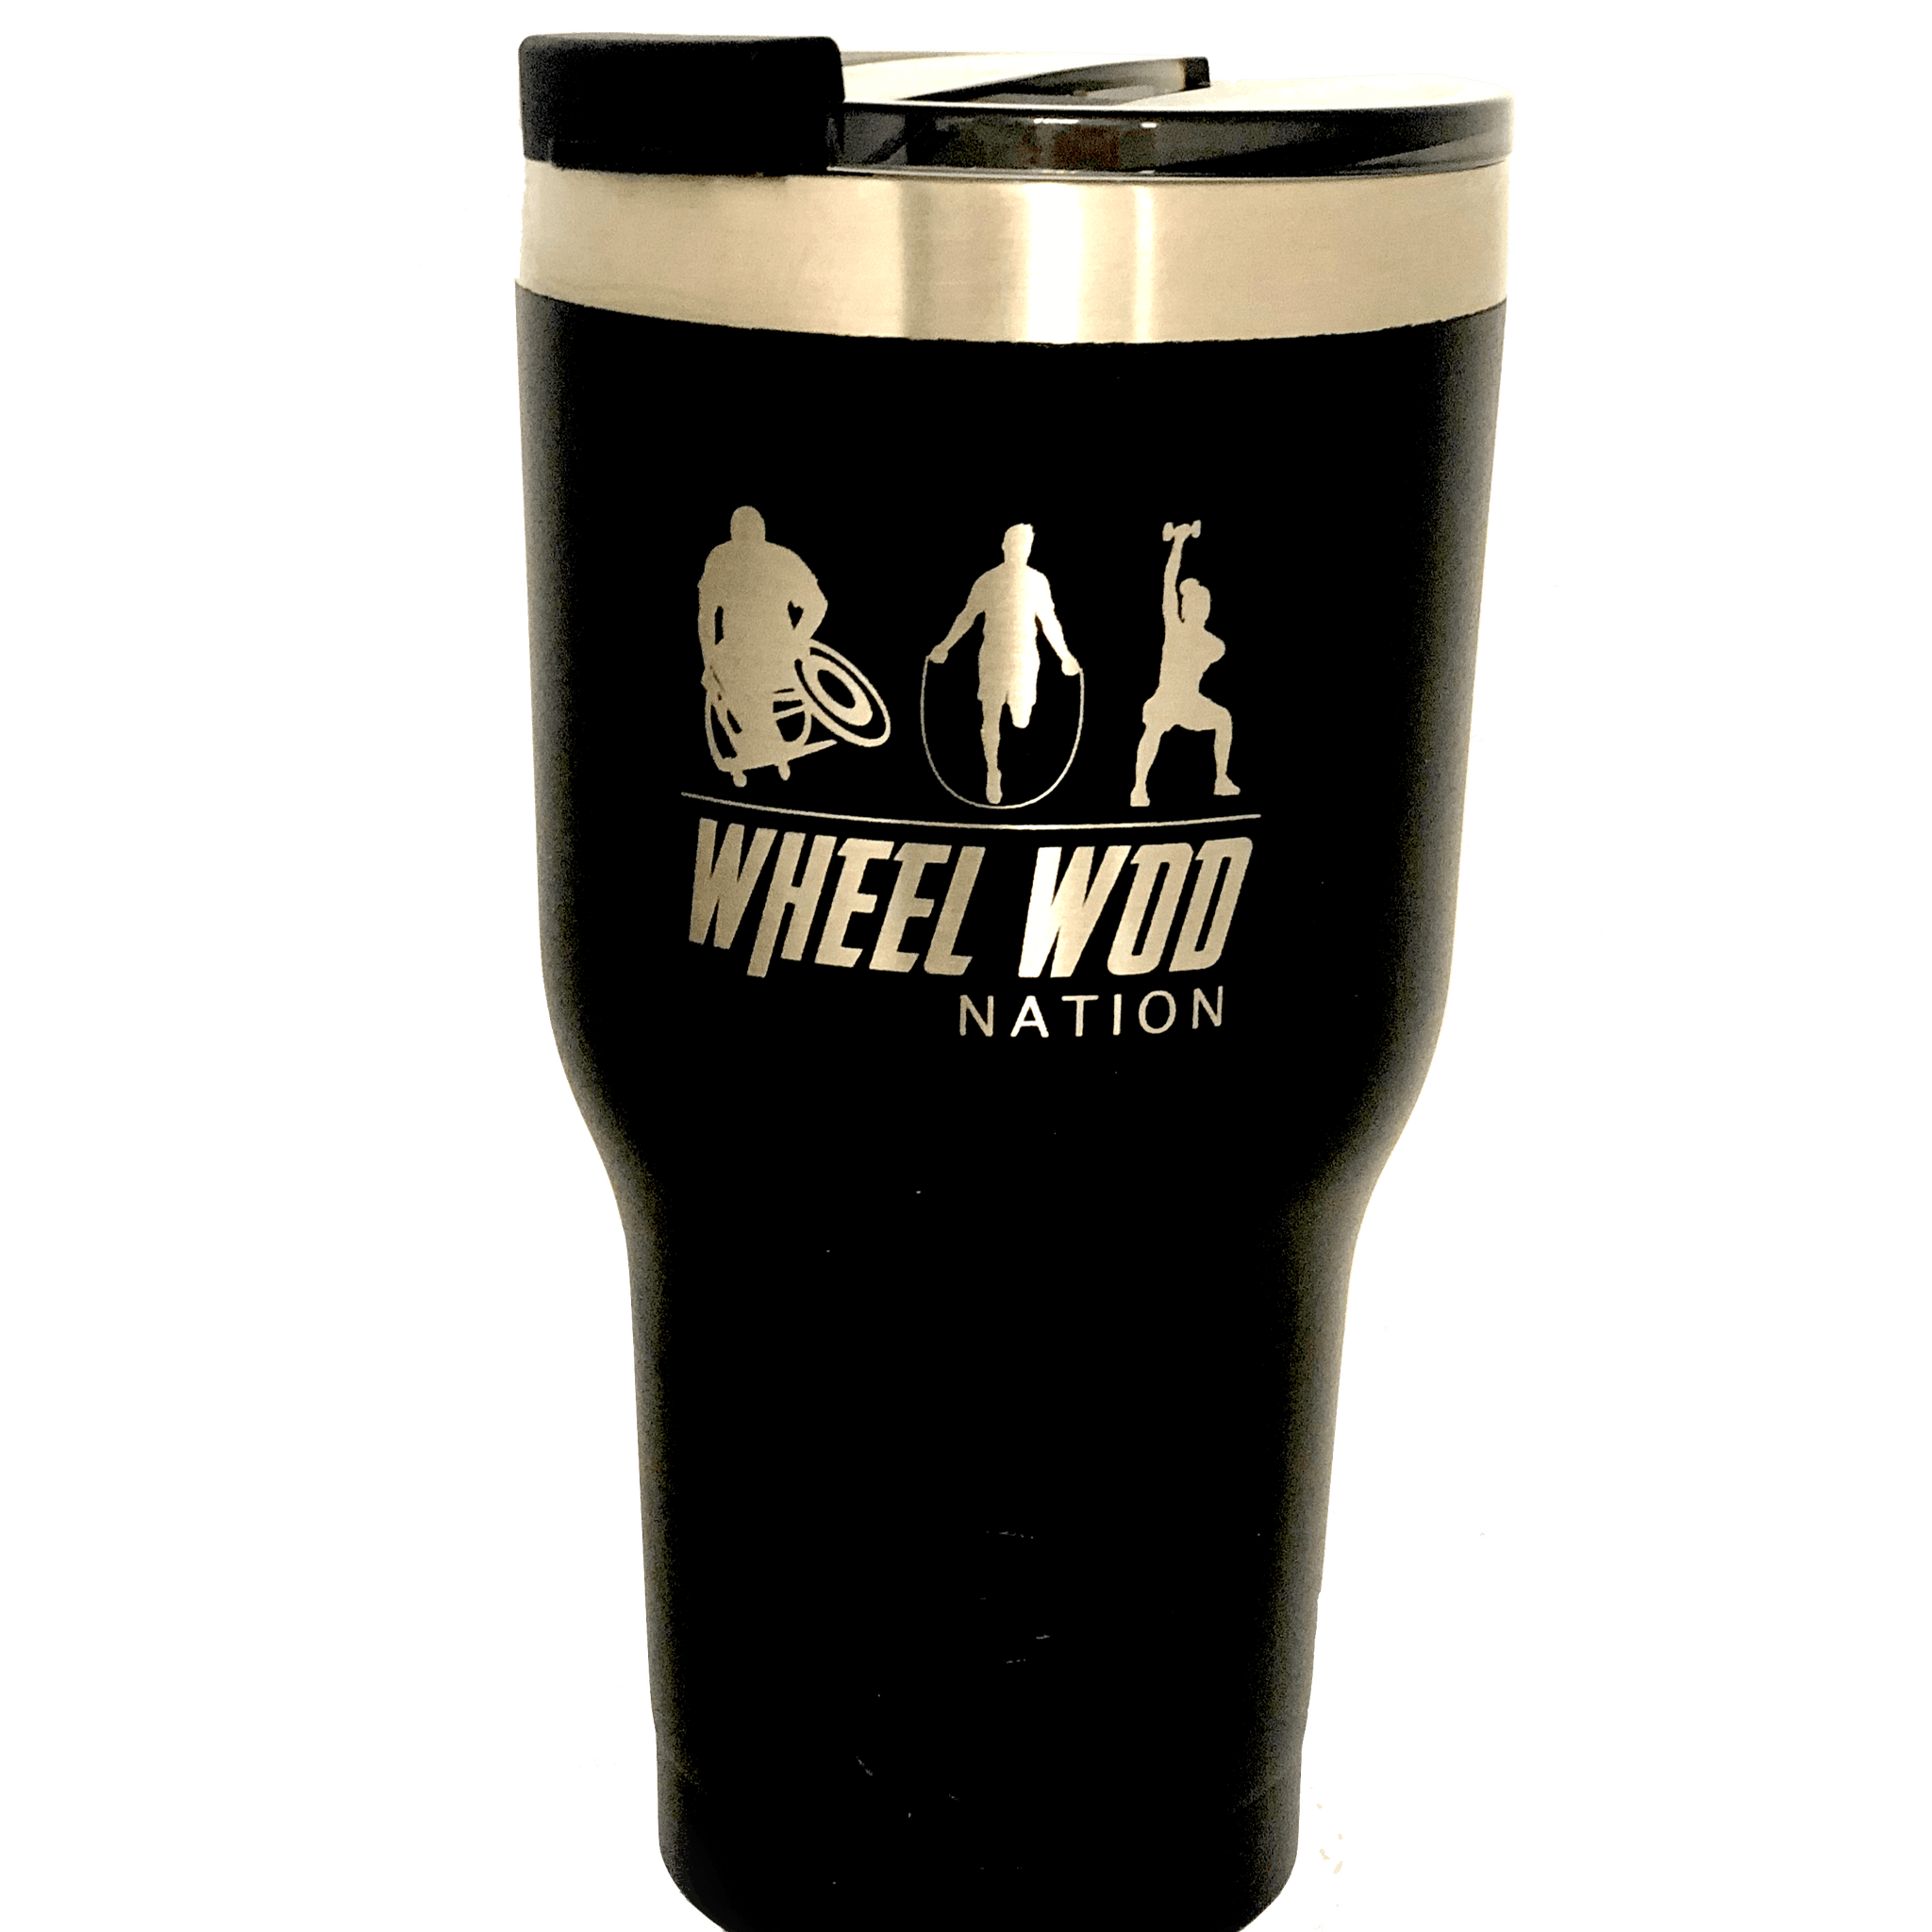 RTIC Tumbler 20oz. with Wheelwod logo showing and Equip logo on the other side.